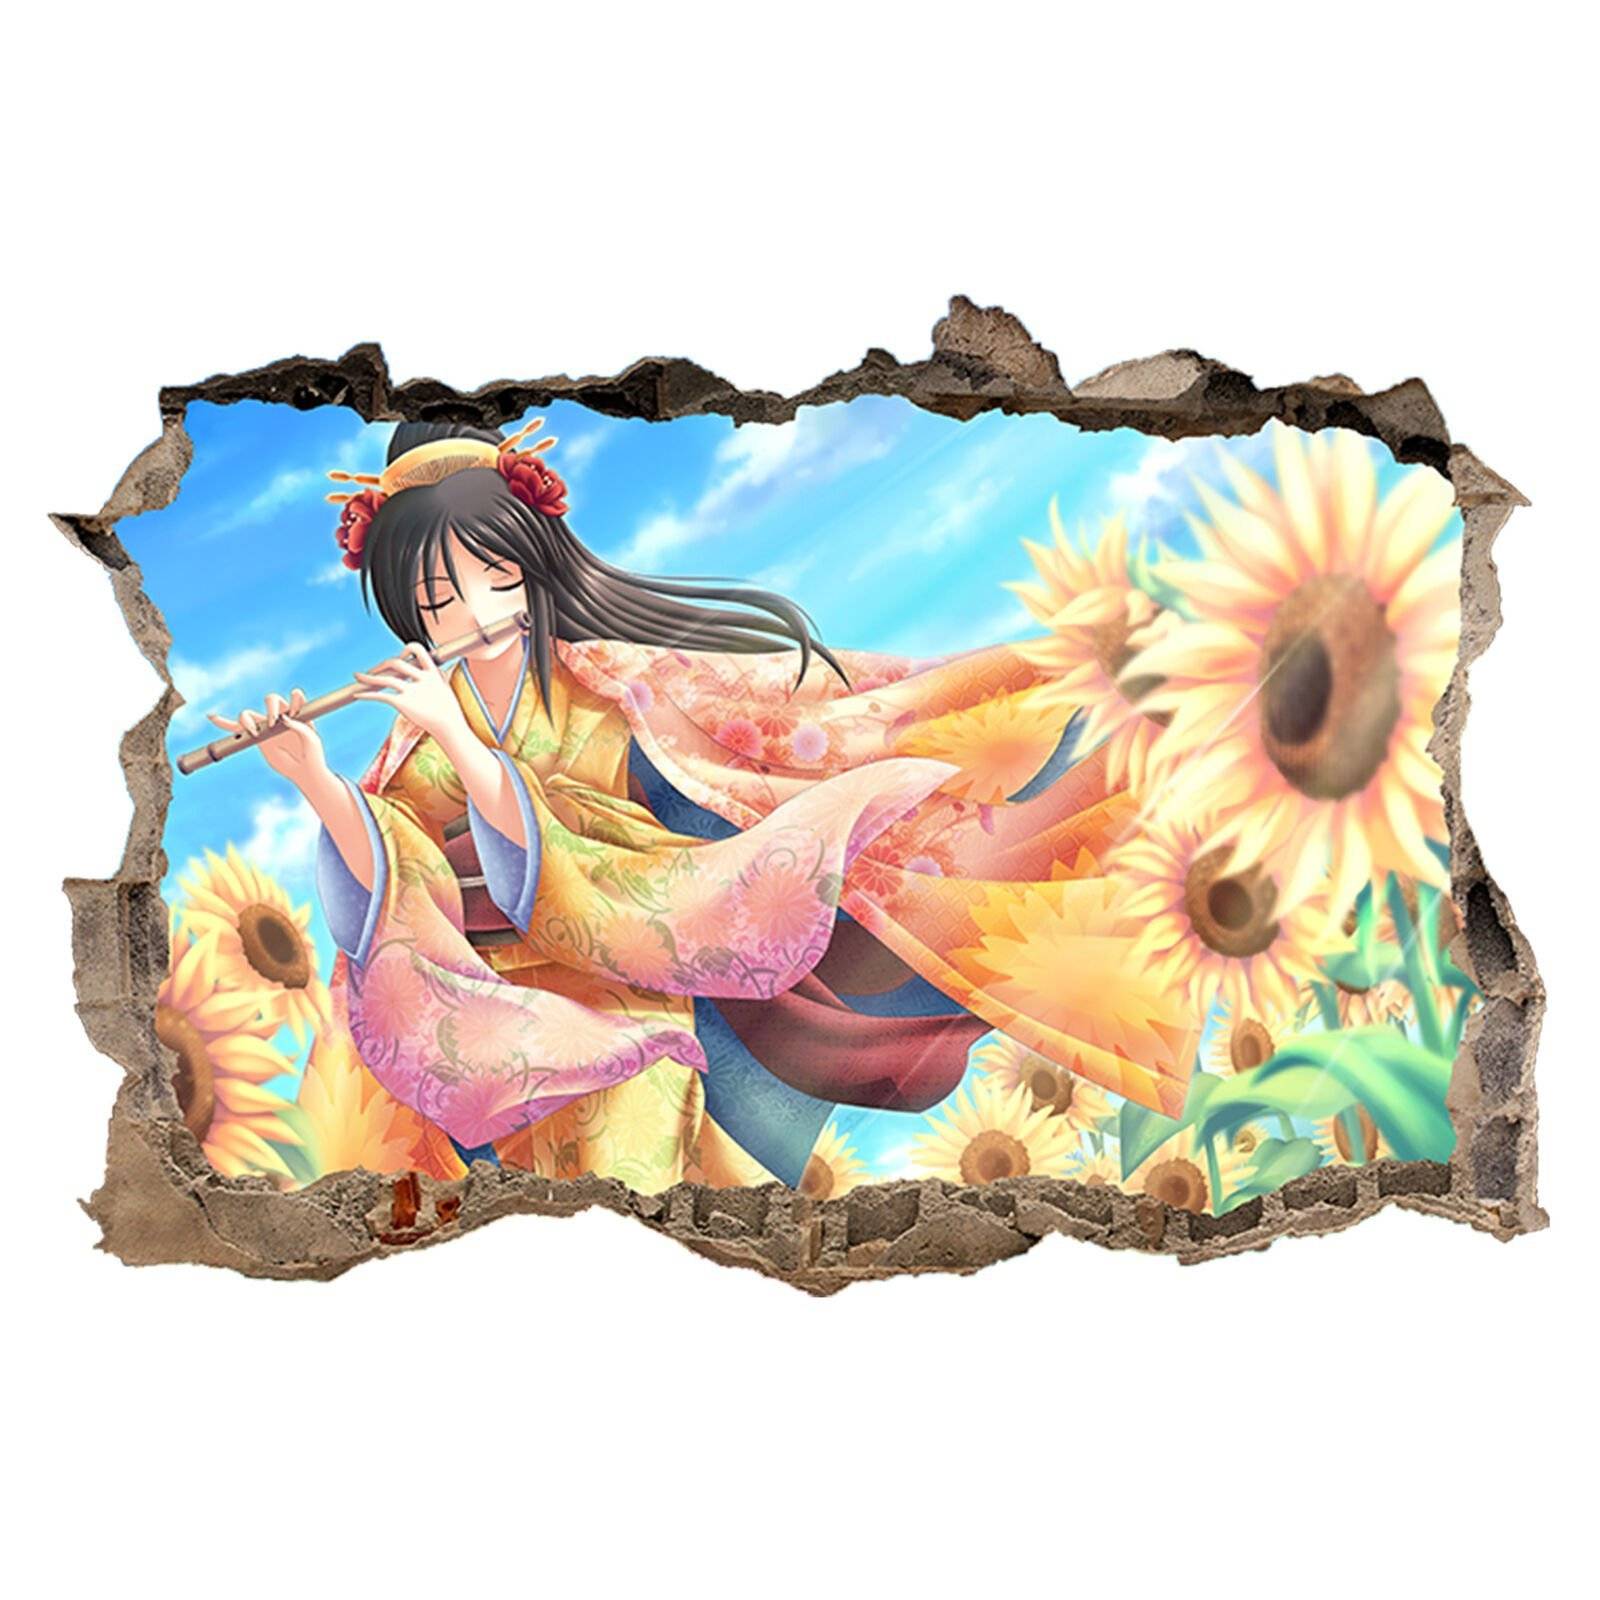 A Hole In The Wall Manga Anime Girl in Sunflower Field 3D Hole in The Wall Effect Wall Sticker Decal  - Blue Side Studio